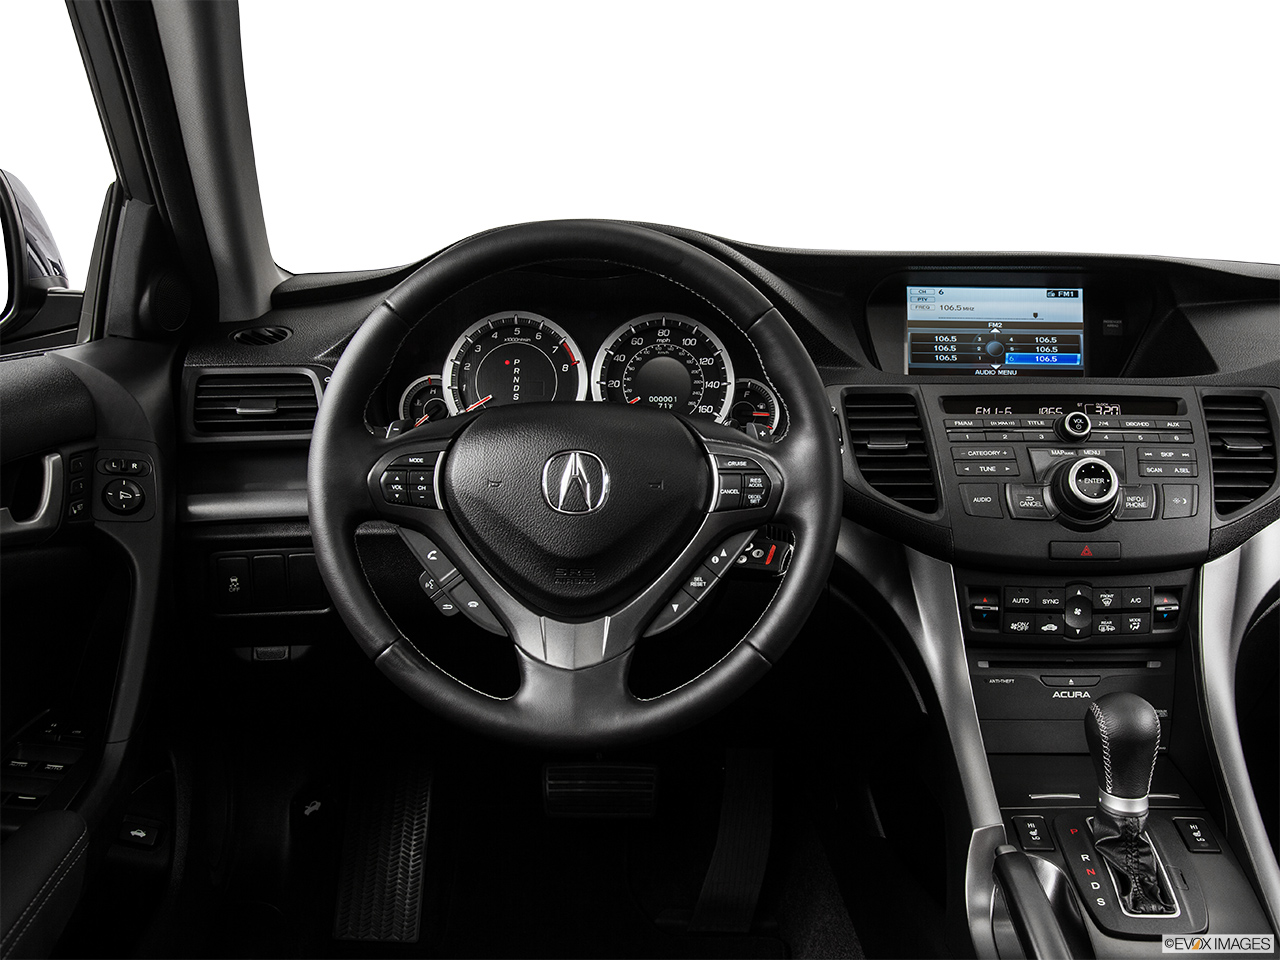 2014 Acura TSX 5-Speed Automatic Steering wheel/Center Console. 